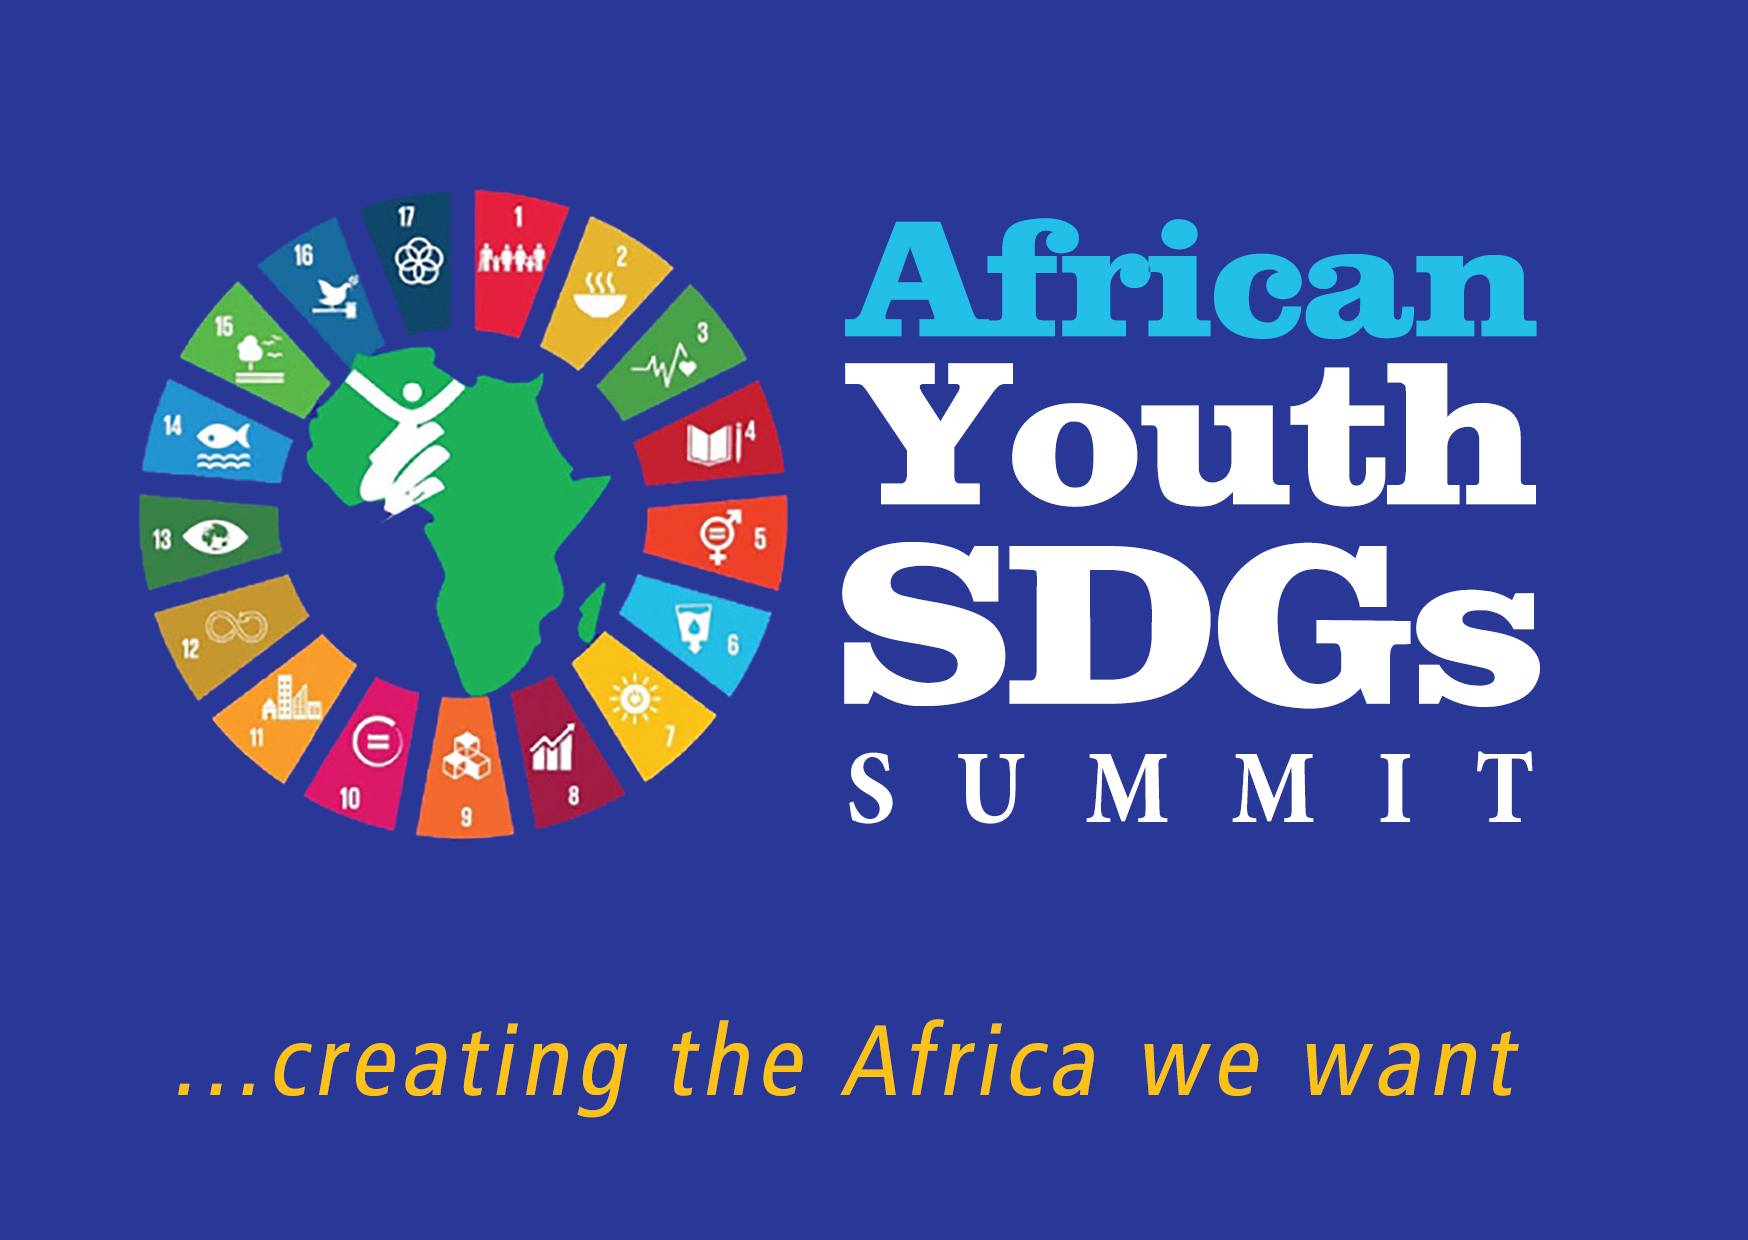 The 3rd African Youth SDGs Summit due in 2020.